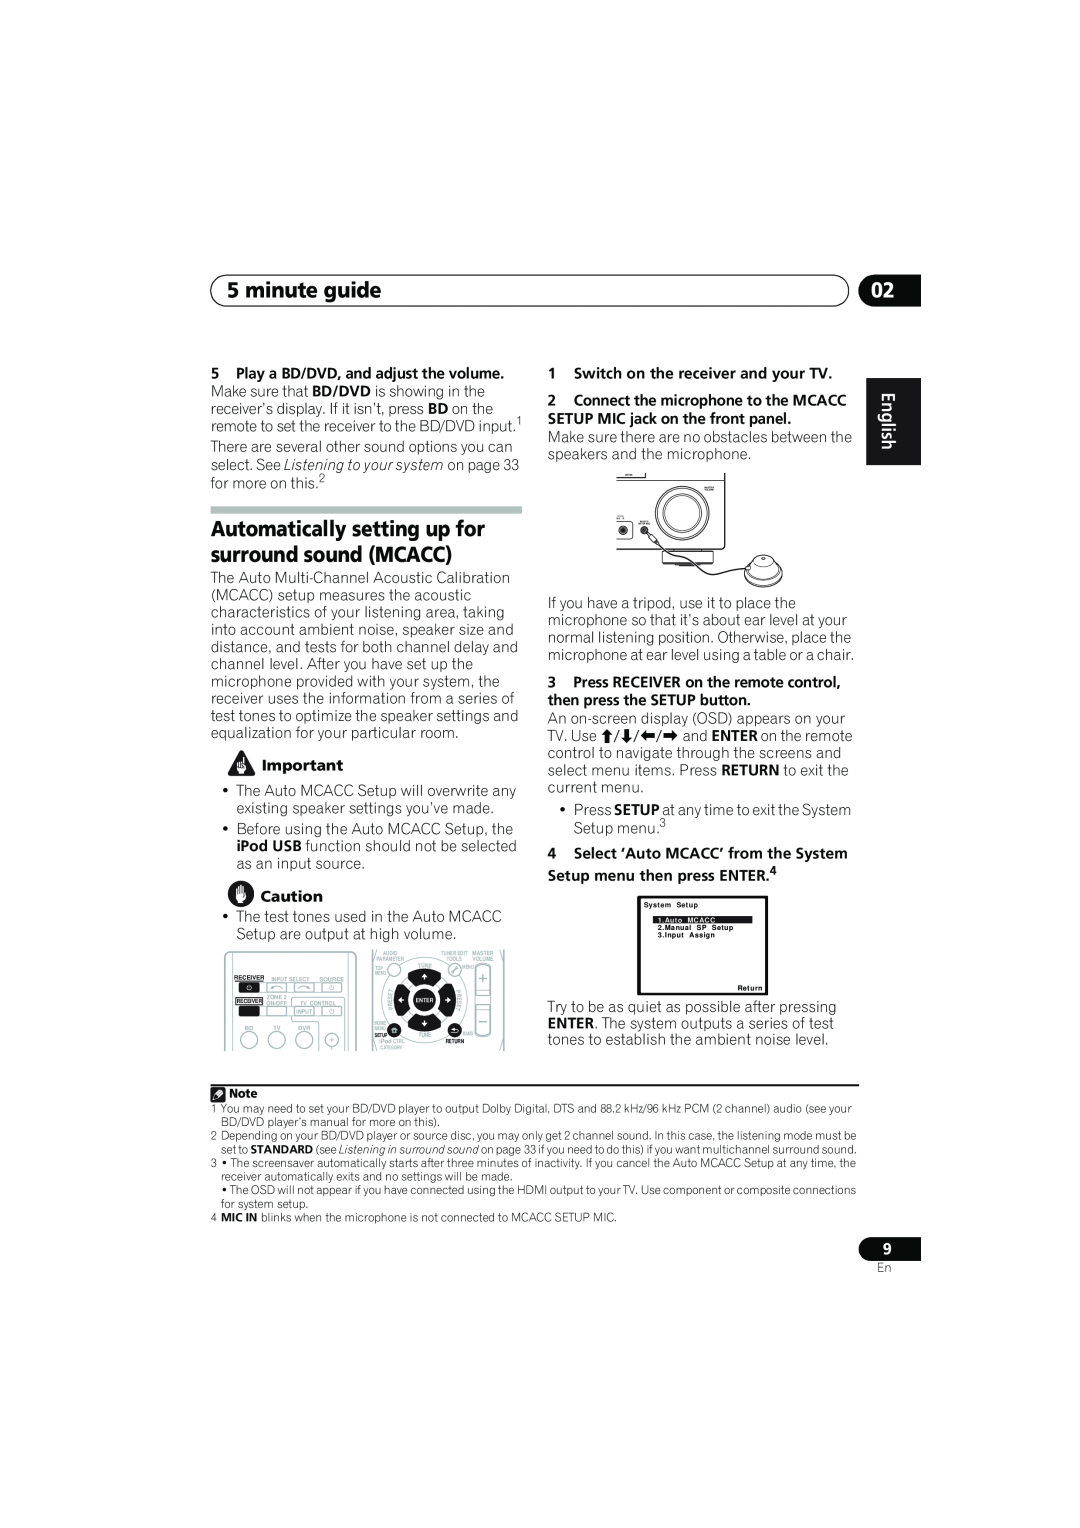 Pioneer VSX-819H-K manual minute guide, Automatically setting up for surround sound MCACC 